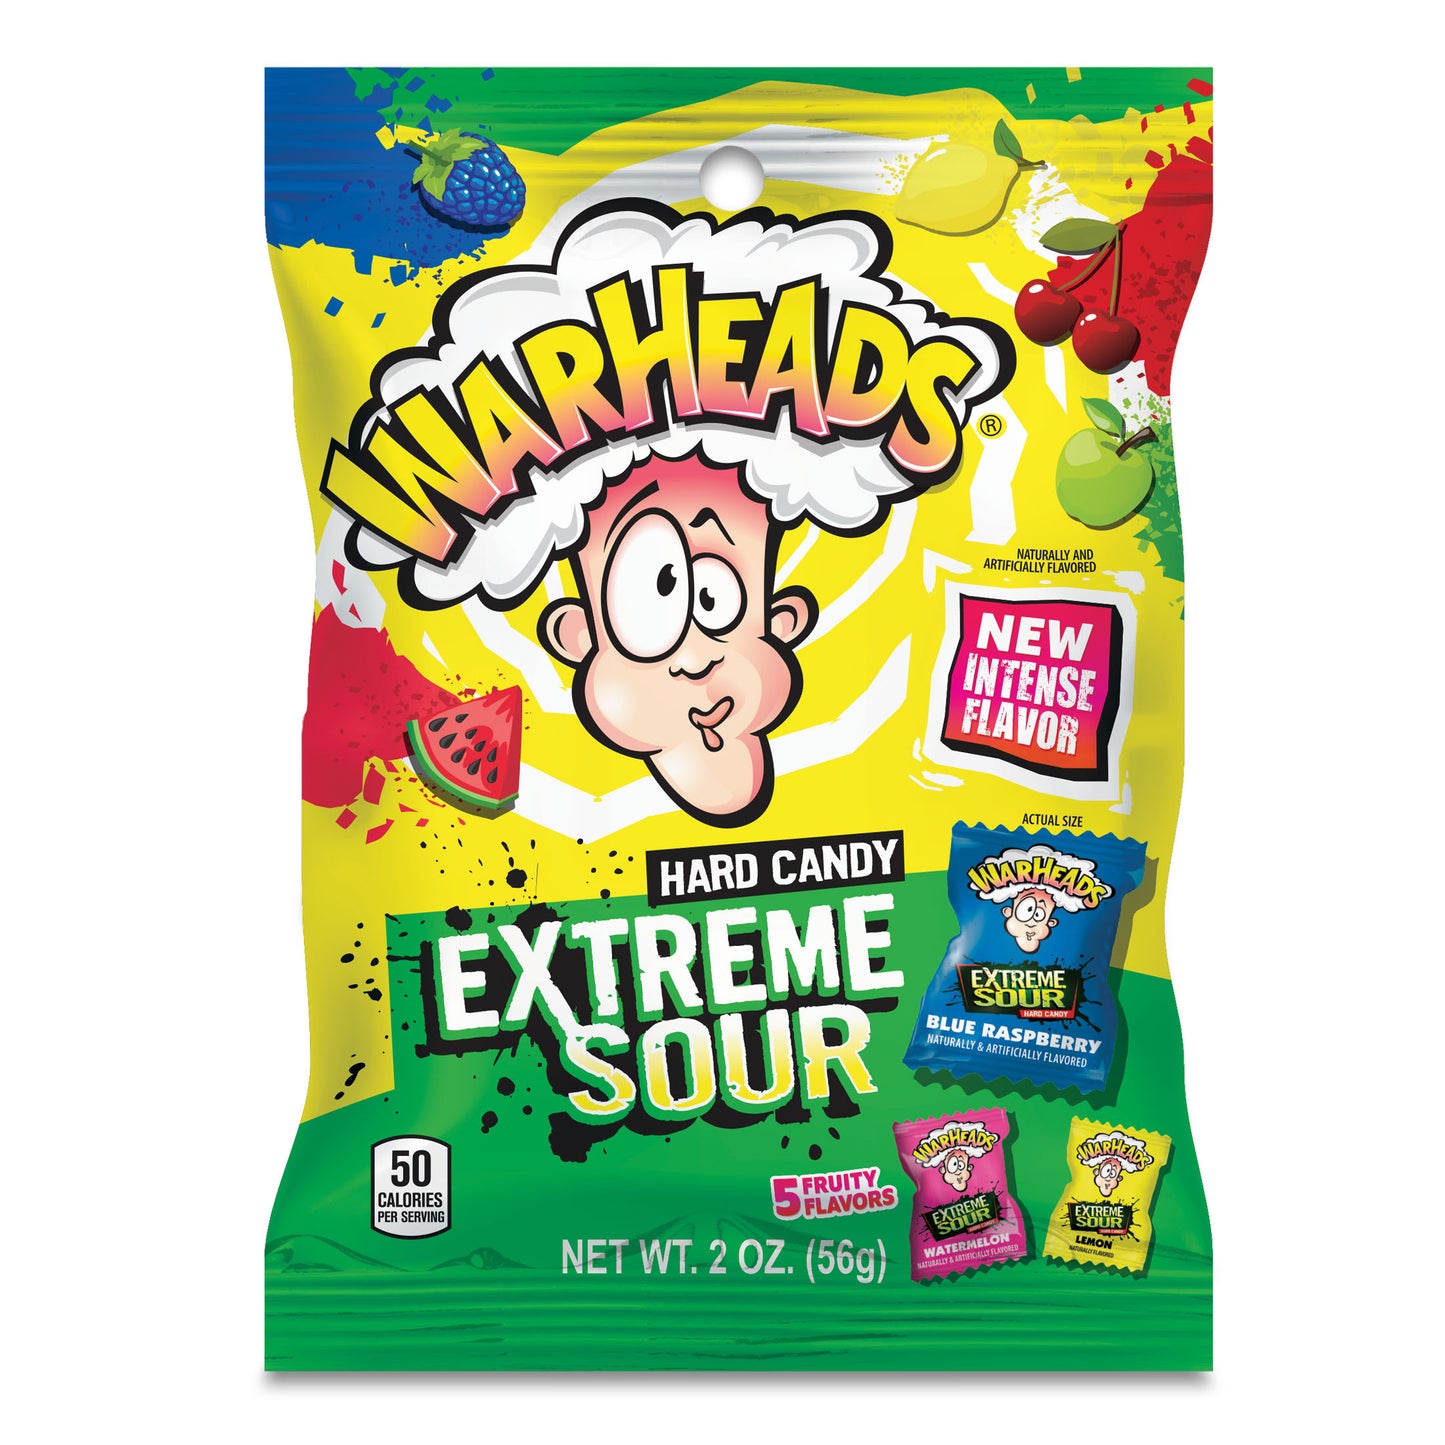 War Heads Extreme Sour Hard Candy